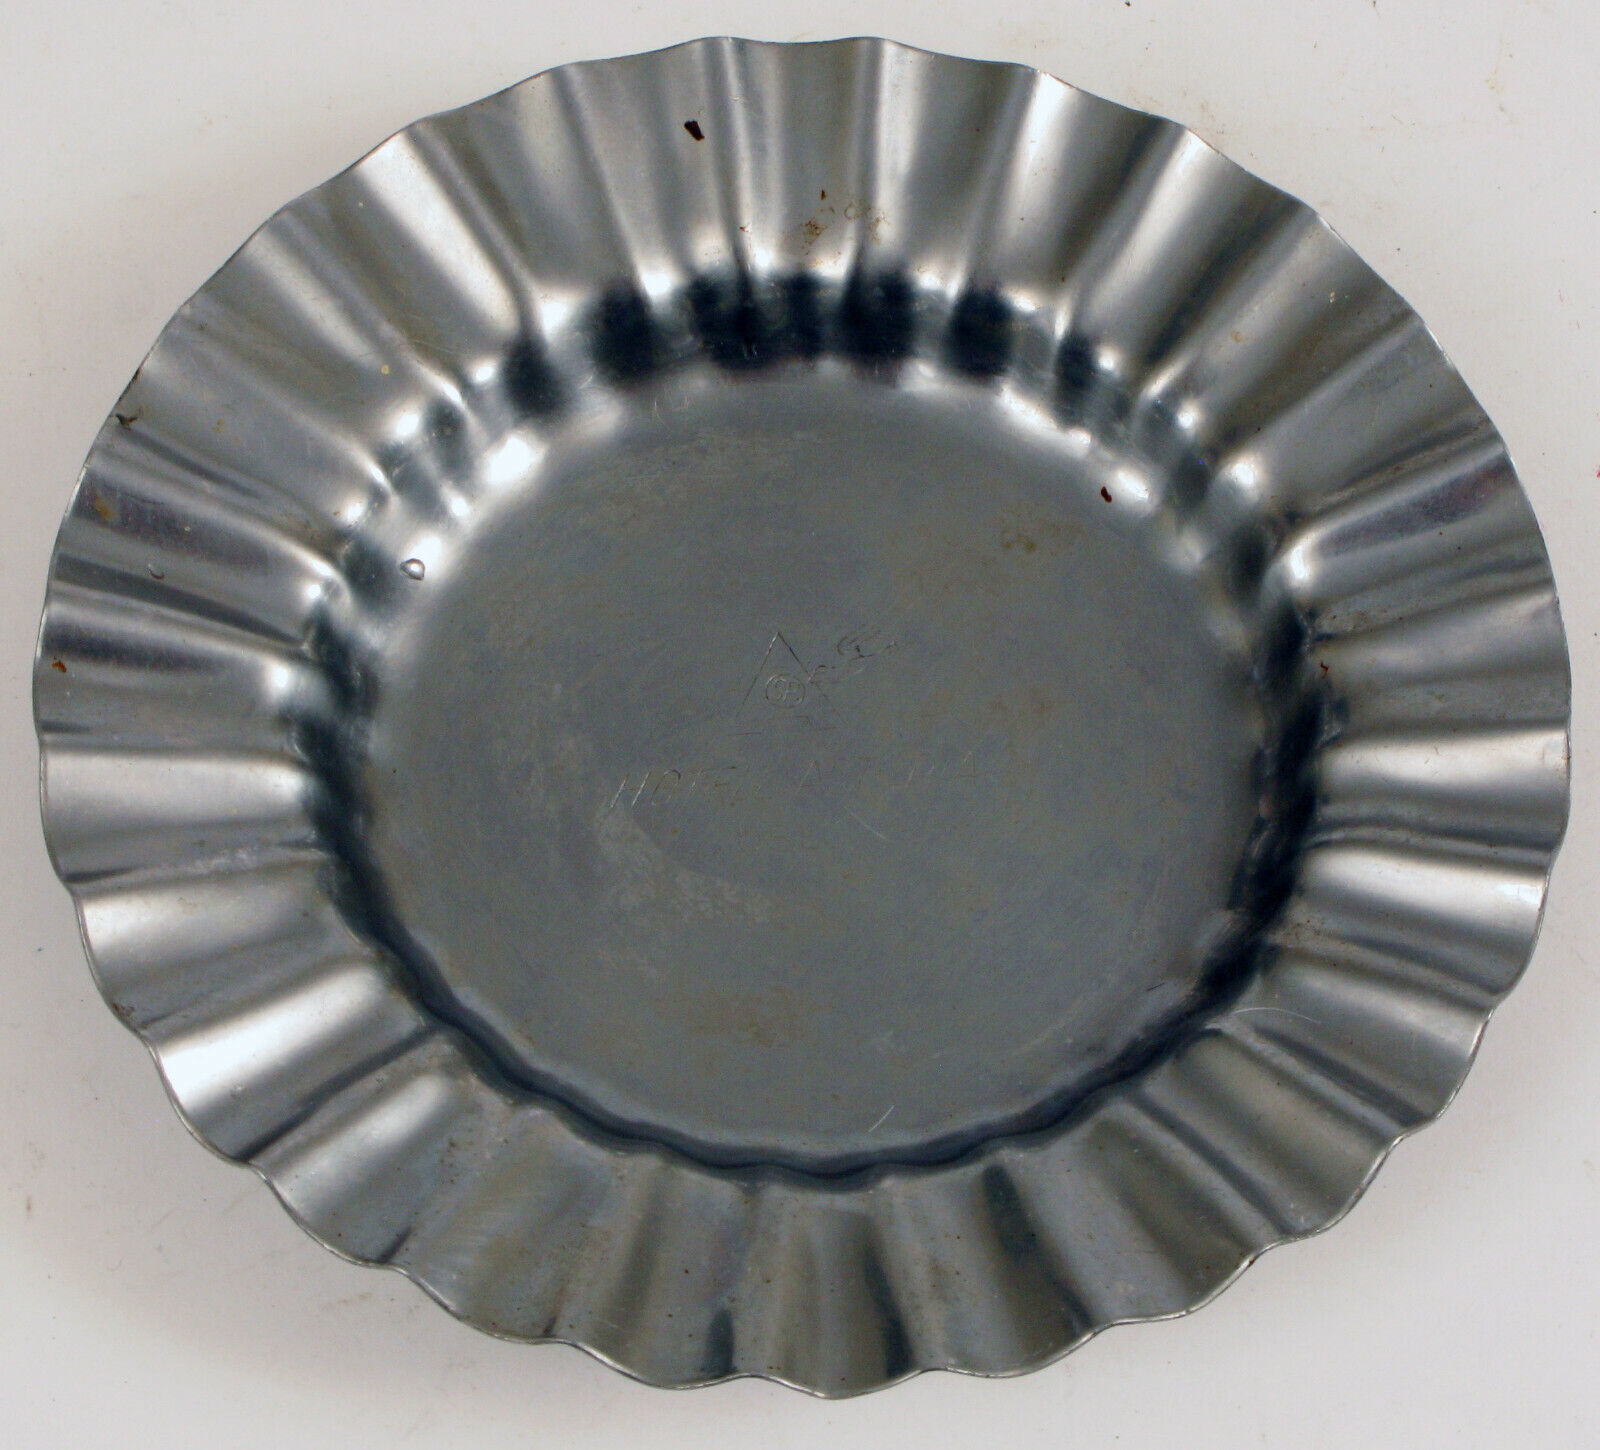 VINTAGE HOTEL ASTORIA OSLO NORWAY FLUTED STAINLESS STEEL ASHTRAY TRINKET DISH 